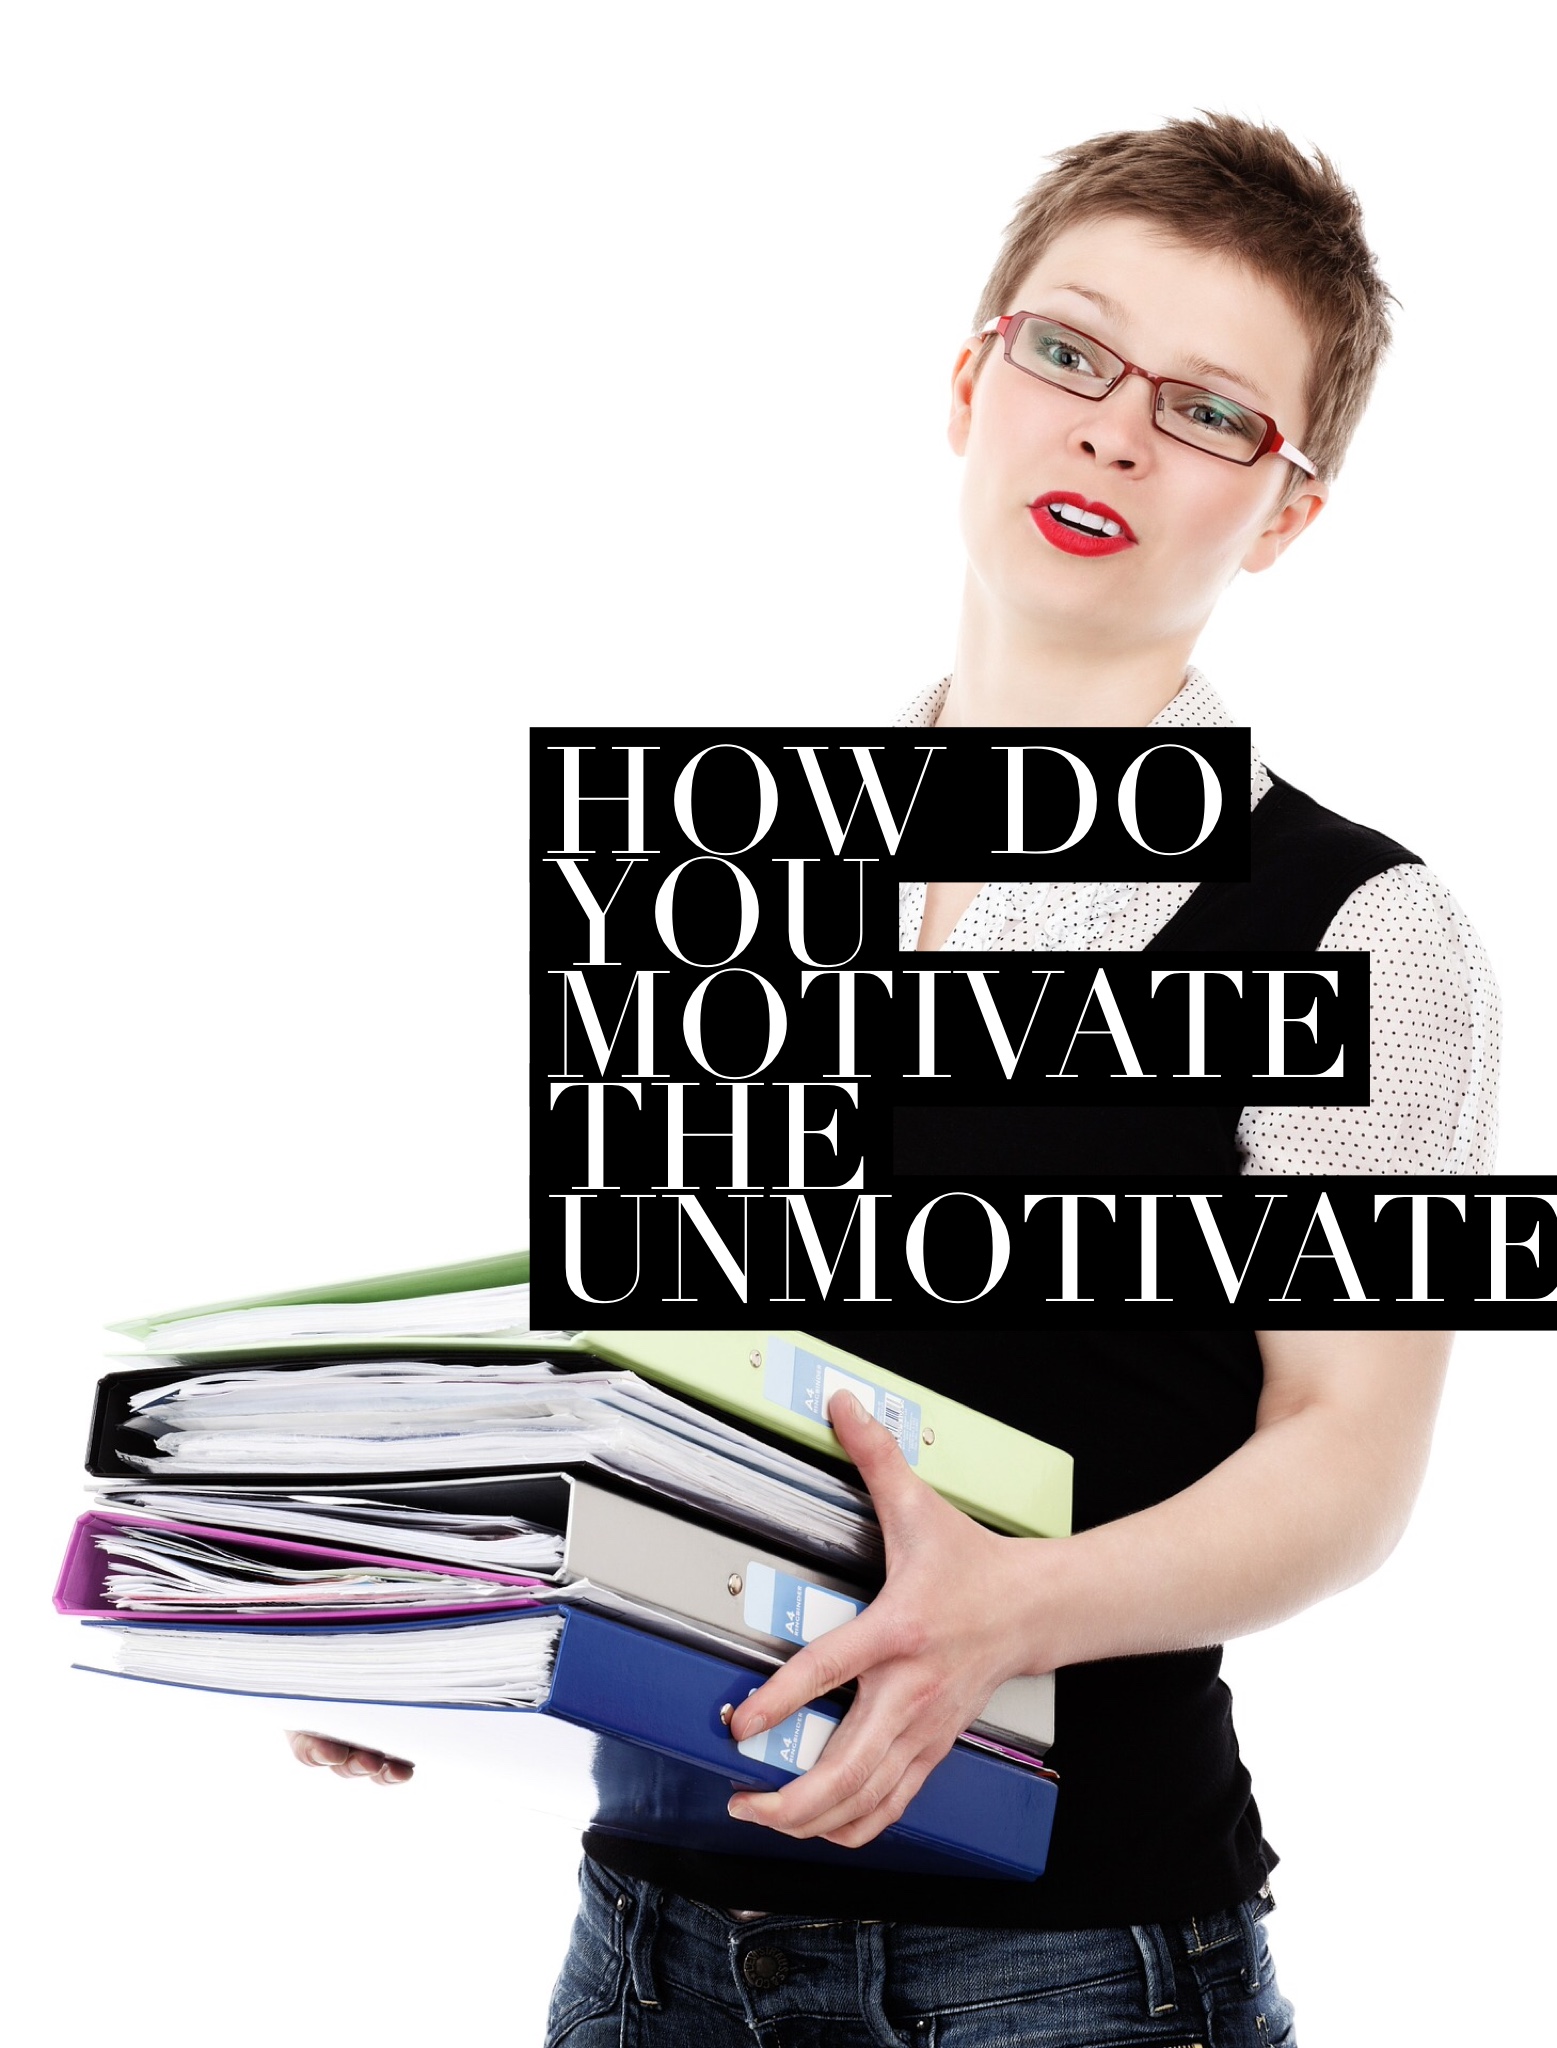 How to motivate the unmotivated..